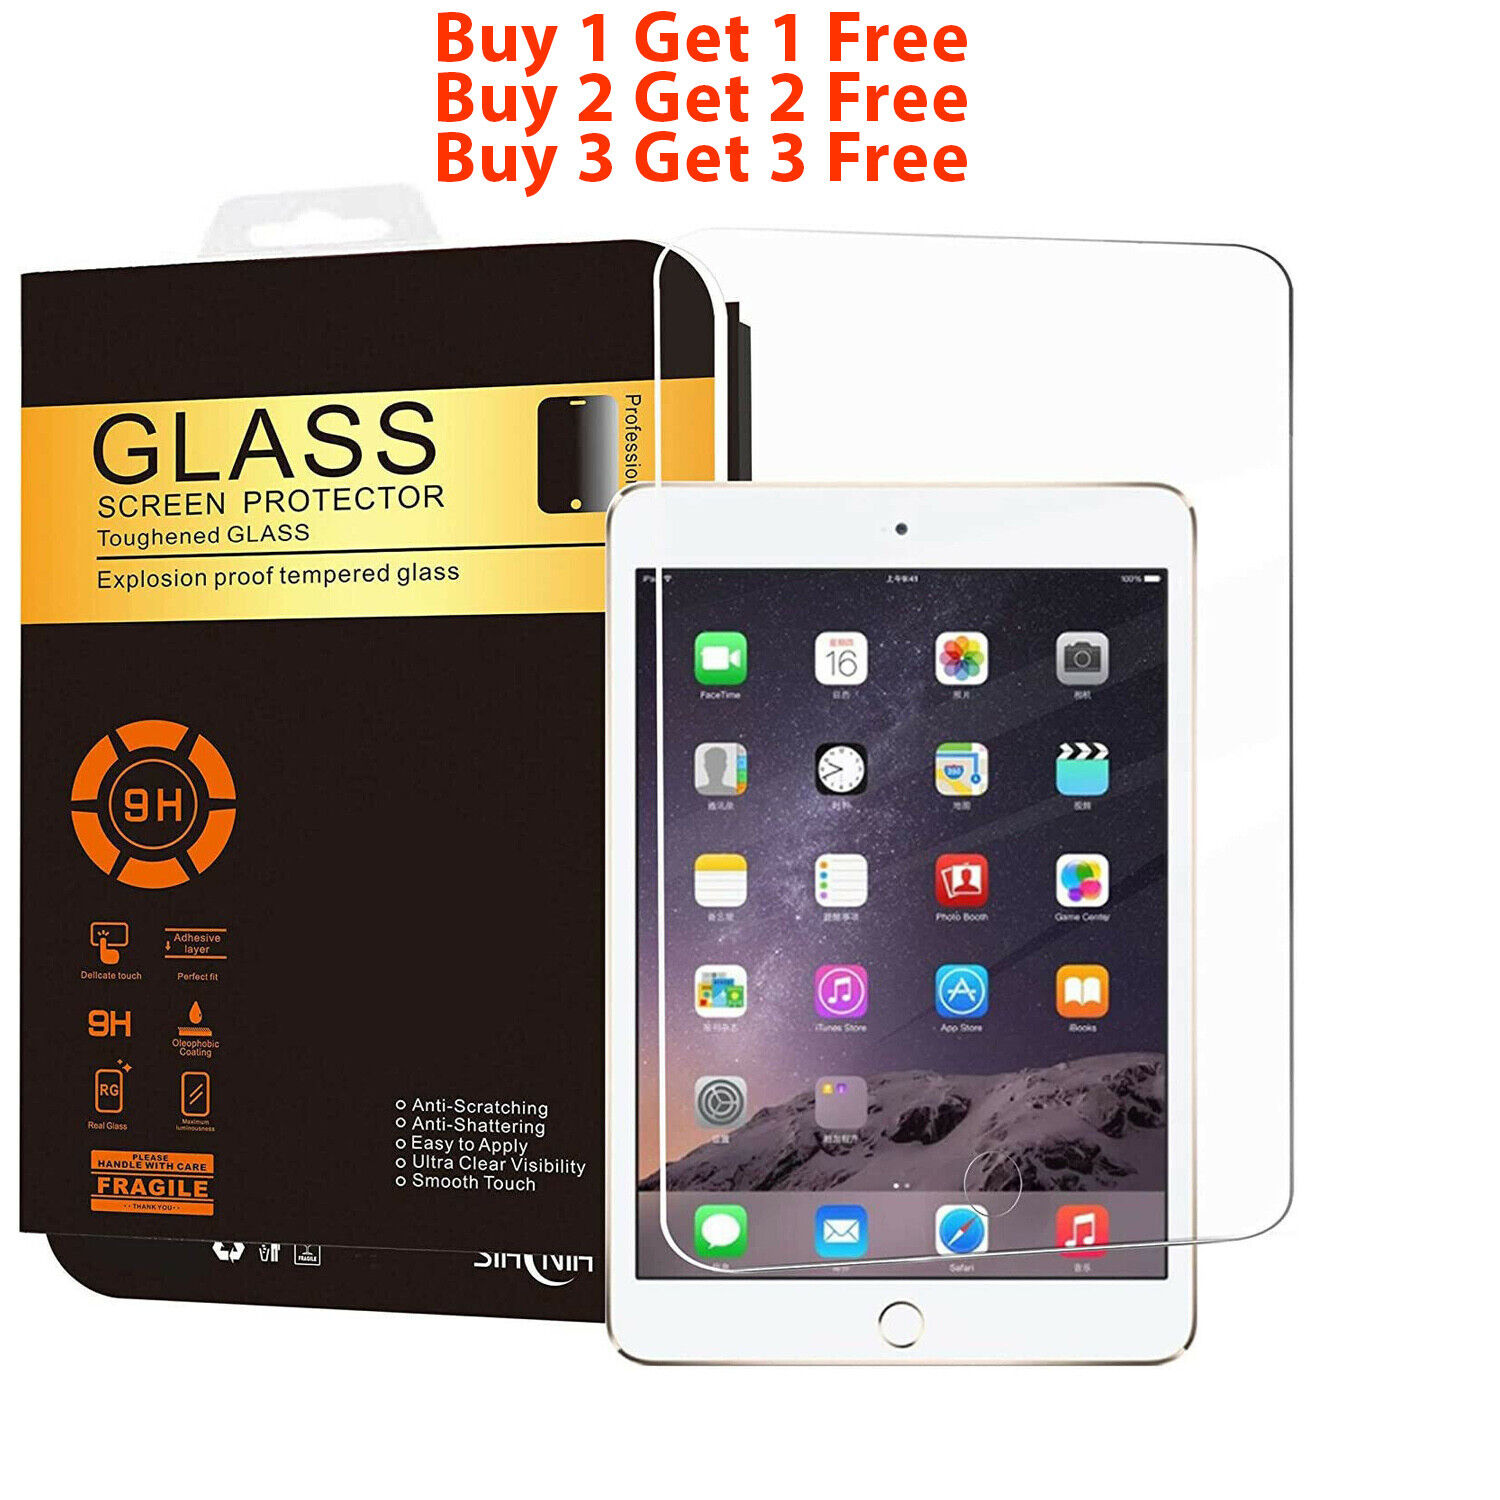 Premium Lower Price Tempered GLASS 9H Screen Protector For iPad Mini 1 2 3